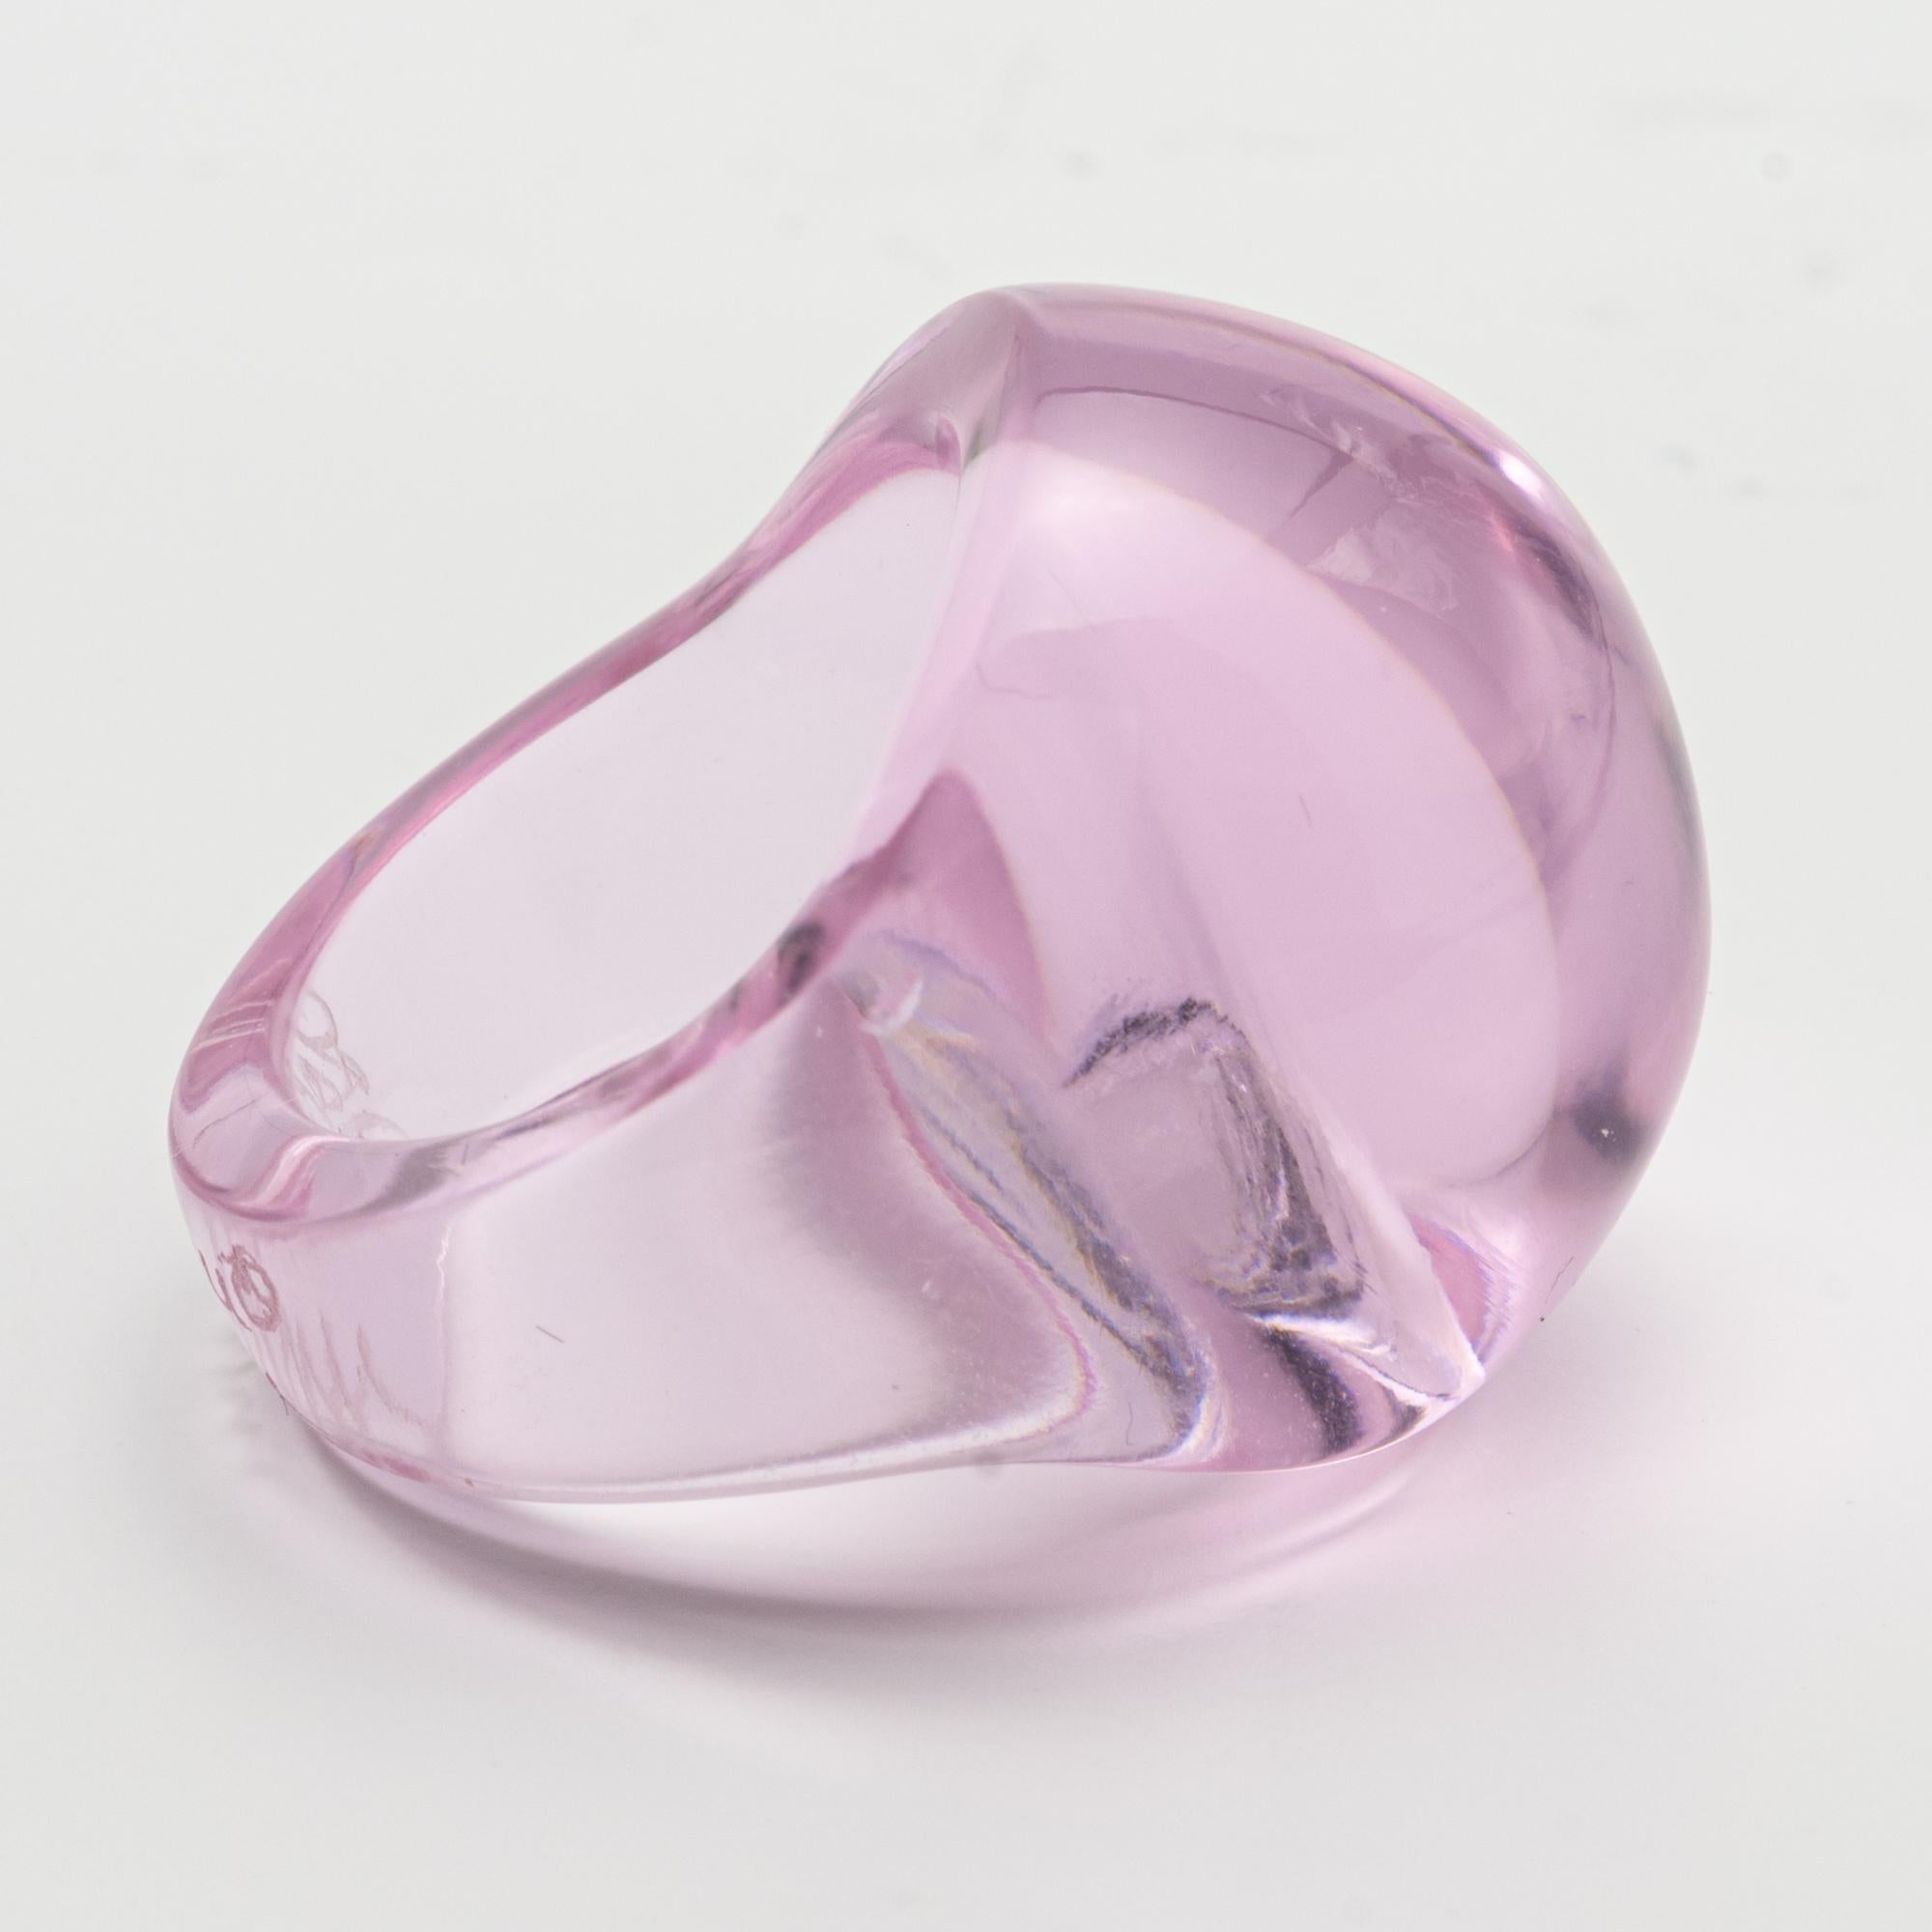 A Lalique Colored Glass Ring
Of bombé form, the pink hue glass ring, signed Lalique, size 5 1/2, circa 1980
